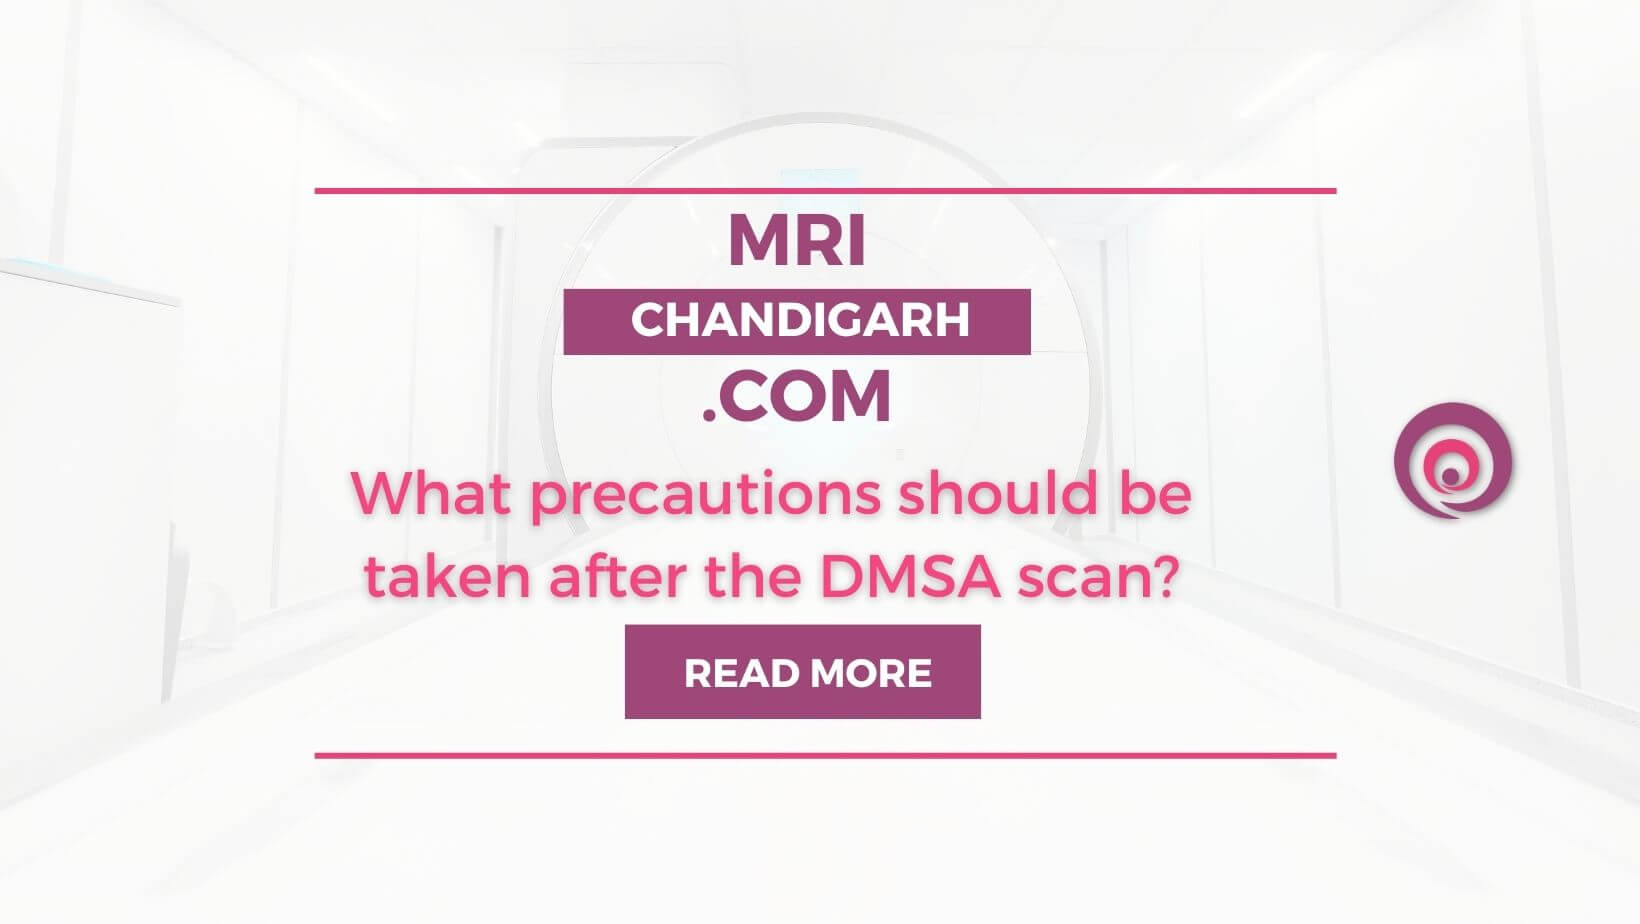 What precautions should be taken after DMSA scan?